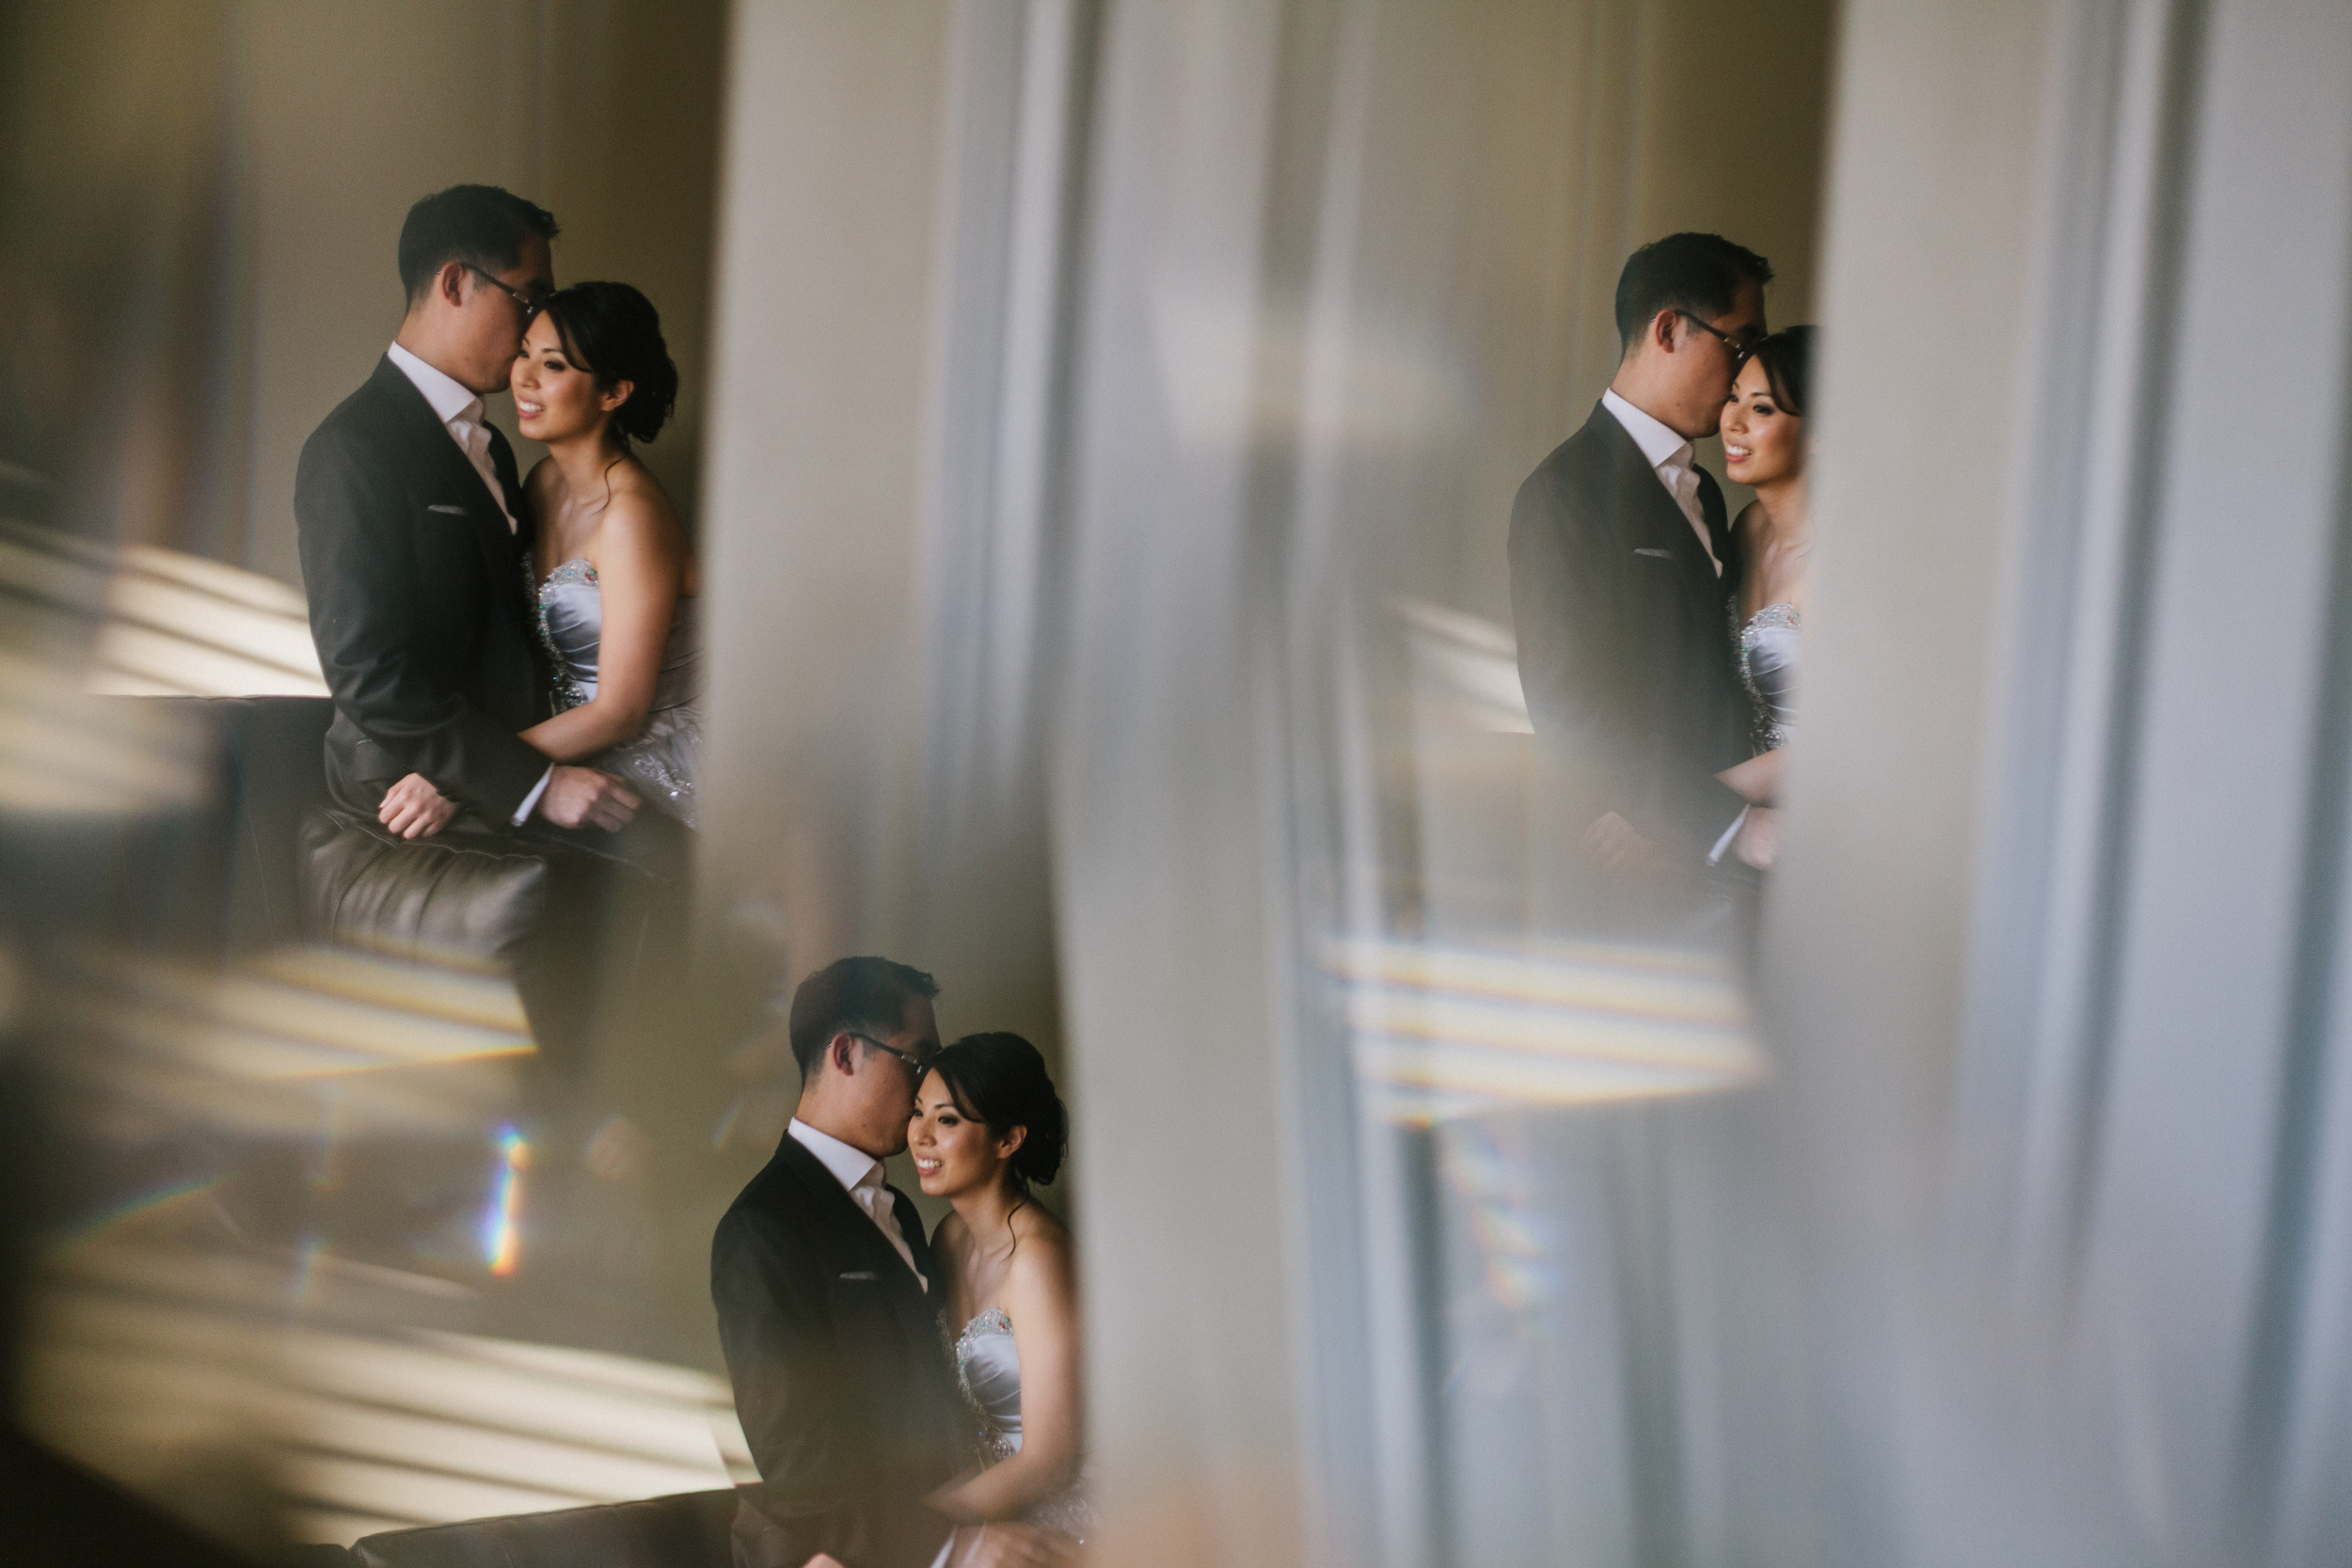 Atlantis Wedding- Michael Rousseau Photography, Theresa and Calvin, Frans diner-high end wedding photography018.jpg